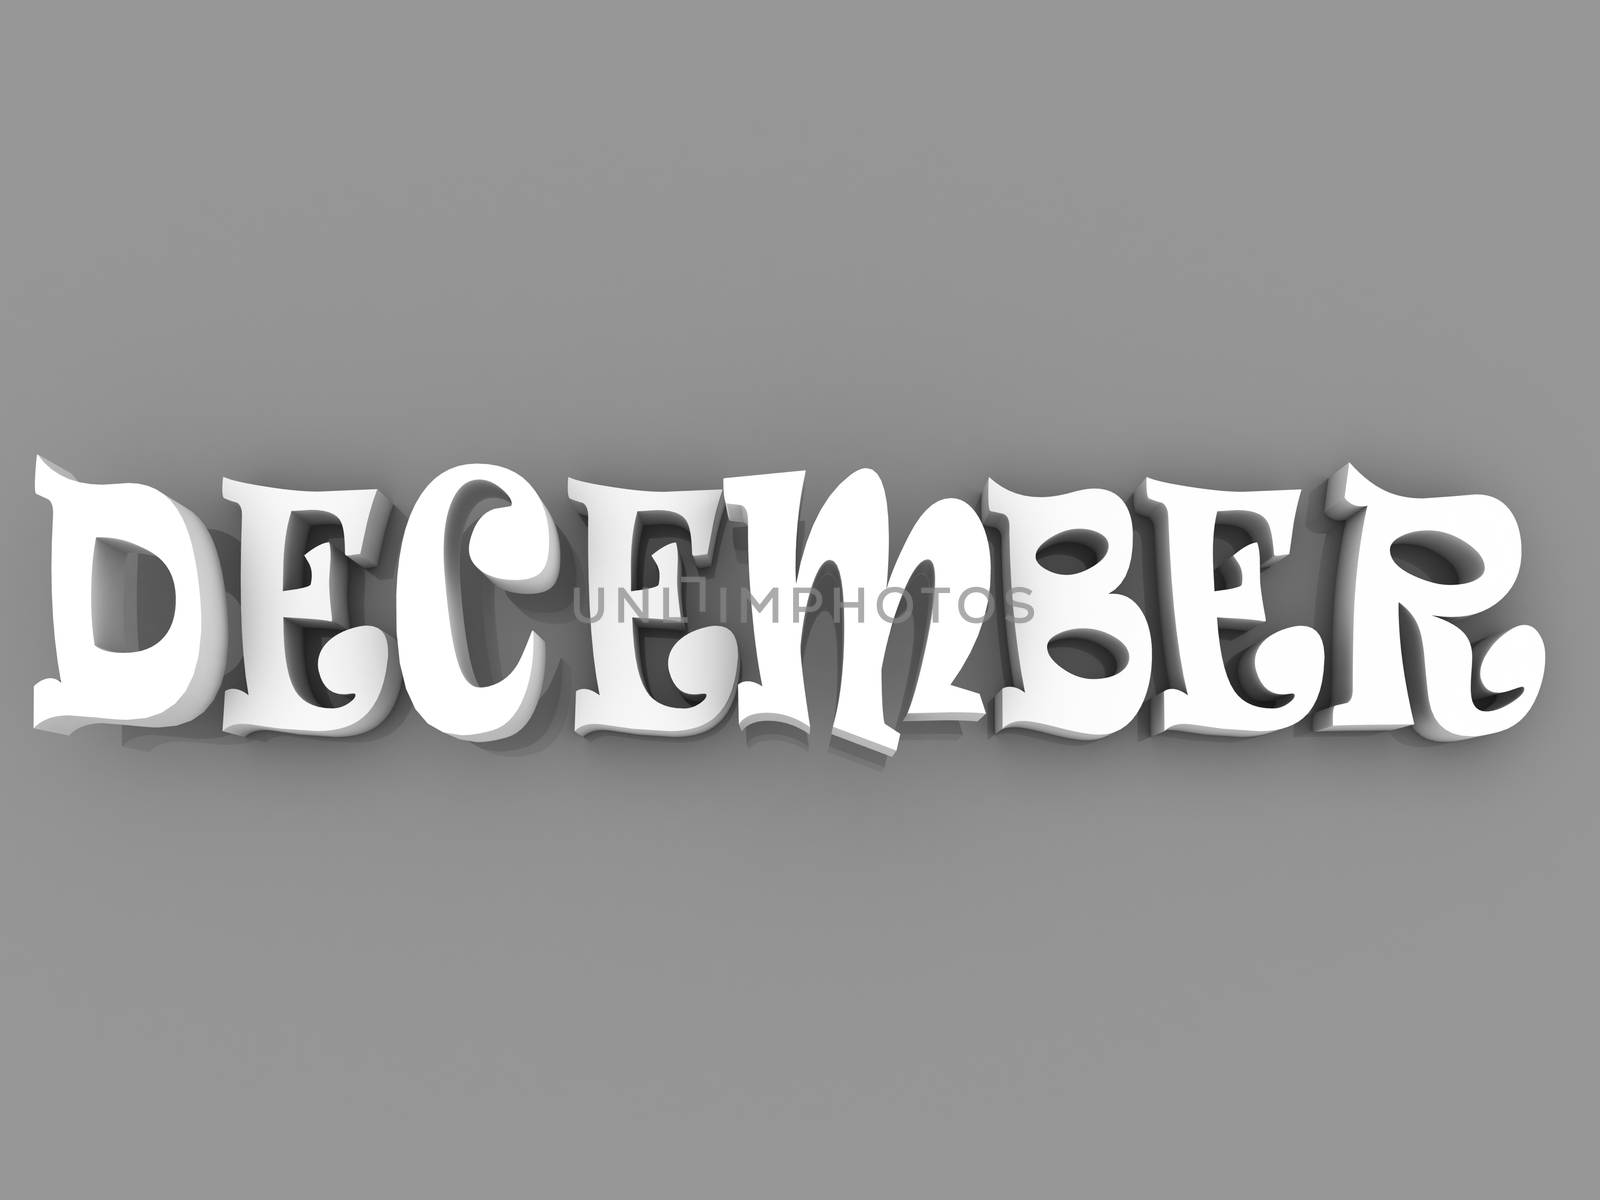 December sign with colour black and white. 3d paper illustration.